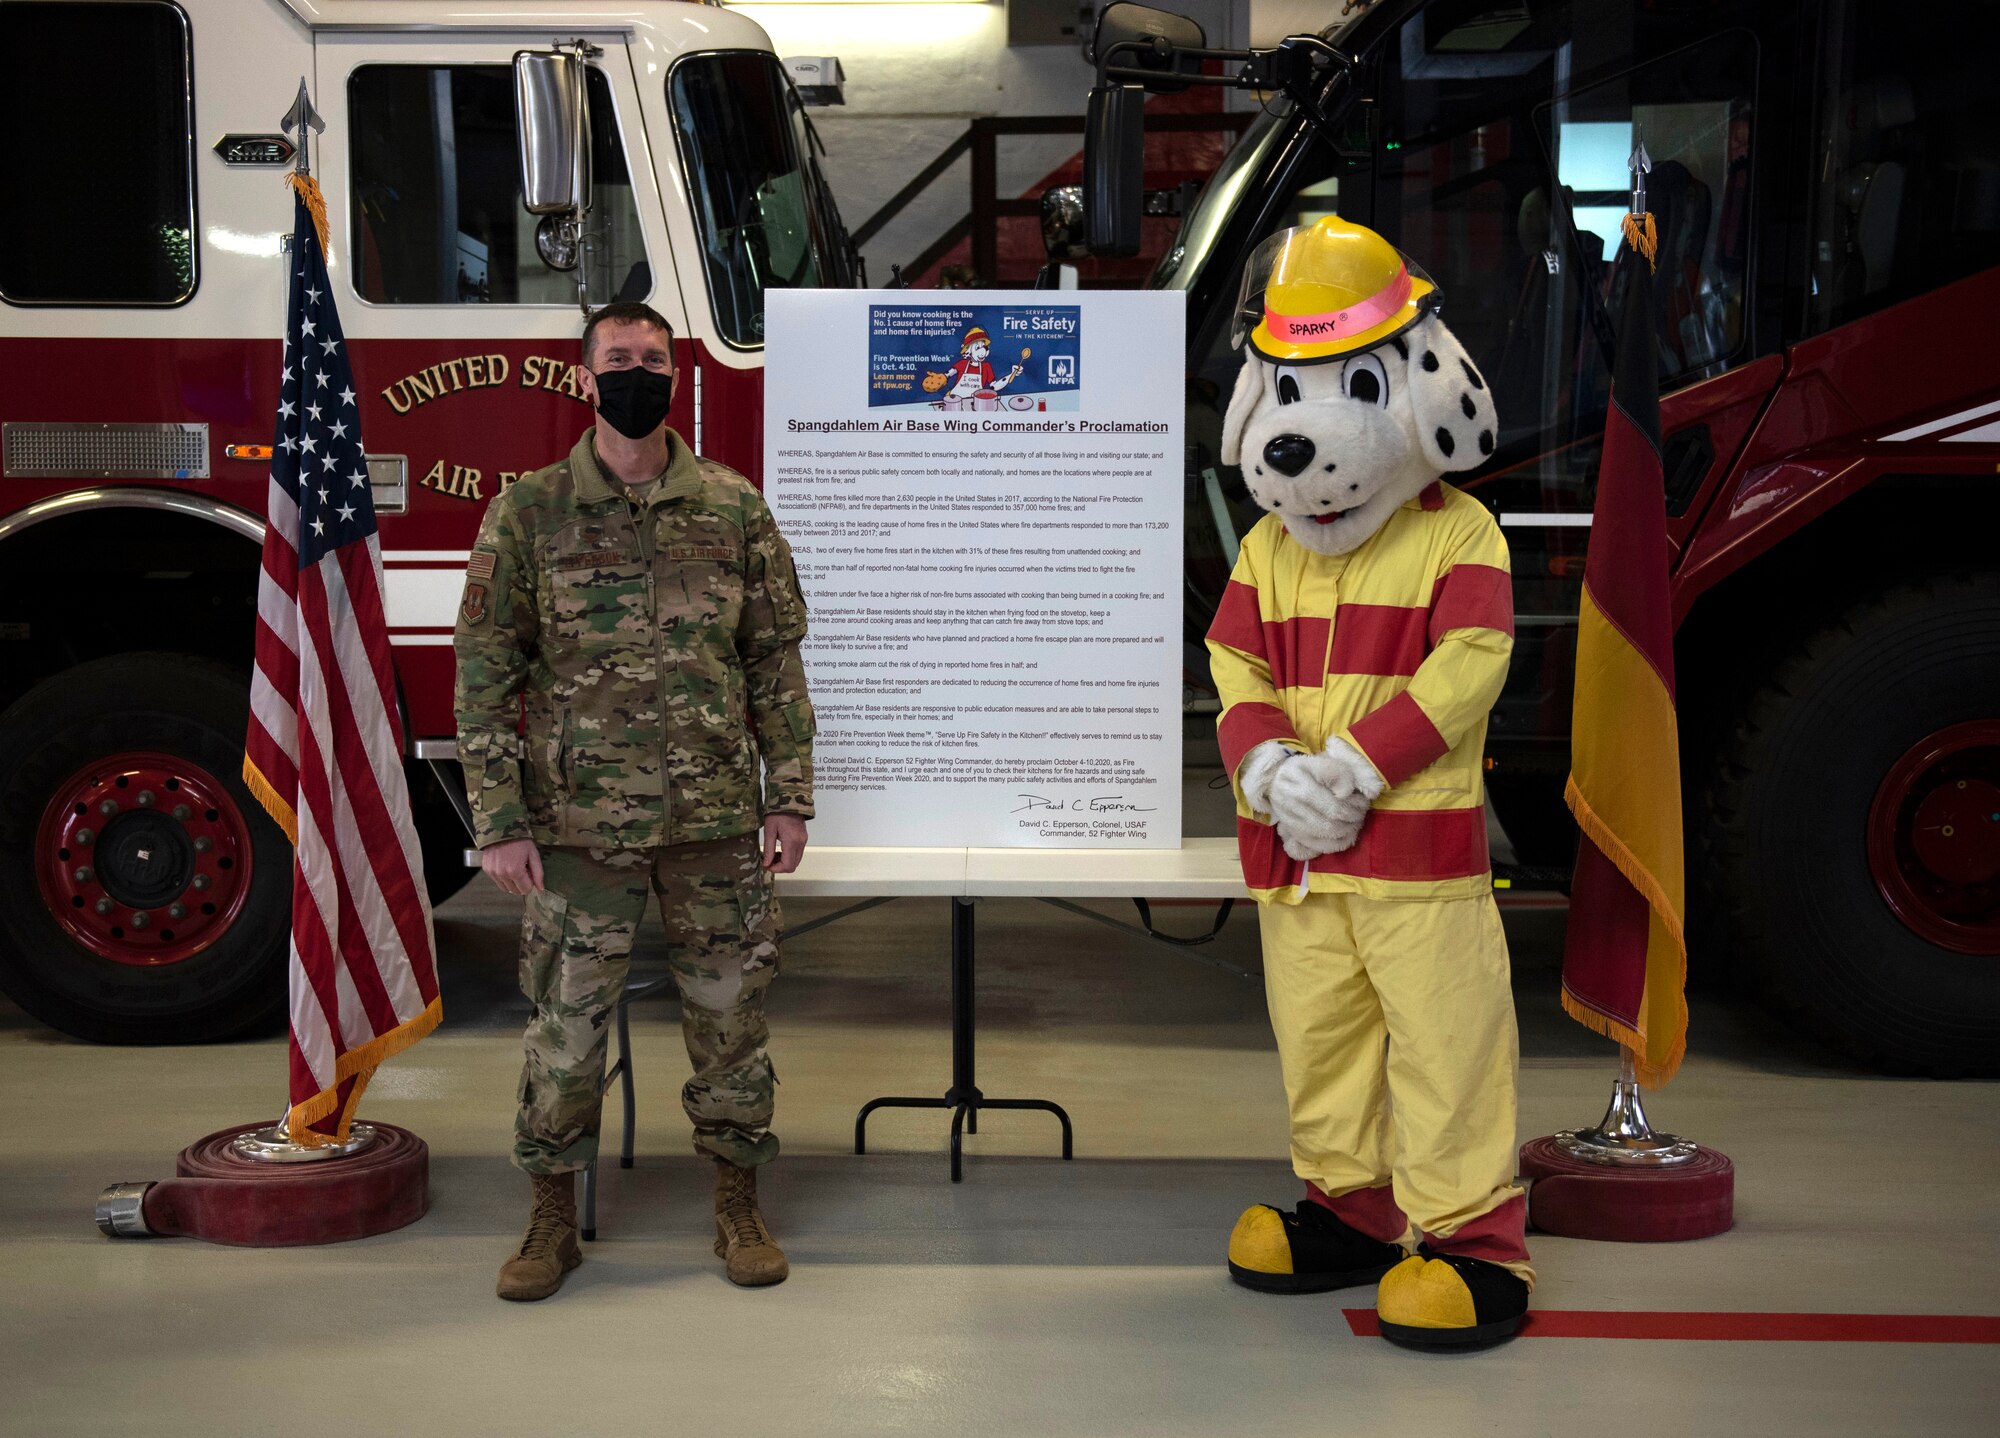 U.S. Air Force Col. David Epperson, 52nd Fighter Wing commander, and Sparky, the fire dog, pose for a photo after the signing of the Spangdahlem Air Base Wing Commander’s Proclamation, Oct. 5, 2020, at Spangdahlem AB, Germany. The Wing Commander’s Proclamation ensures Saber families will take necessary measures to prevent home fires and continue to educate themselves on fire prevention safety measures. (U.S. Air Force photo by Senior Airman Melody W. Howley)